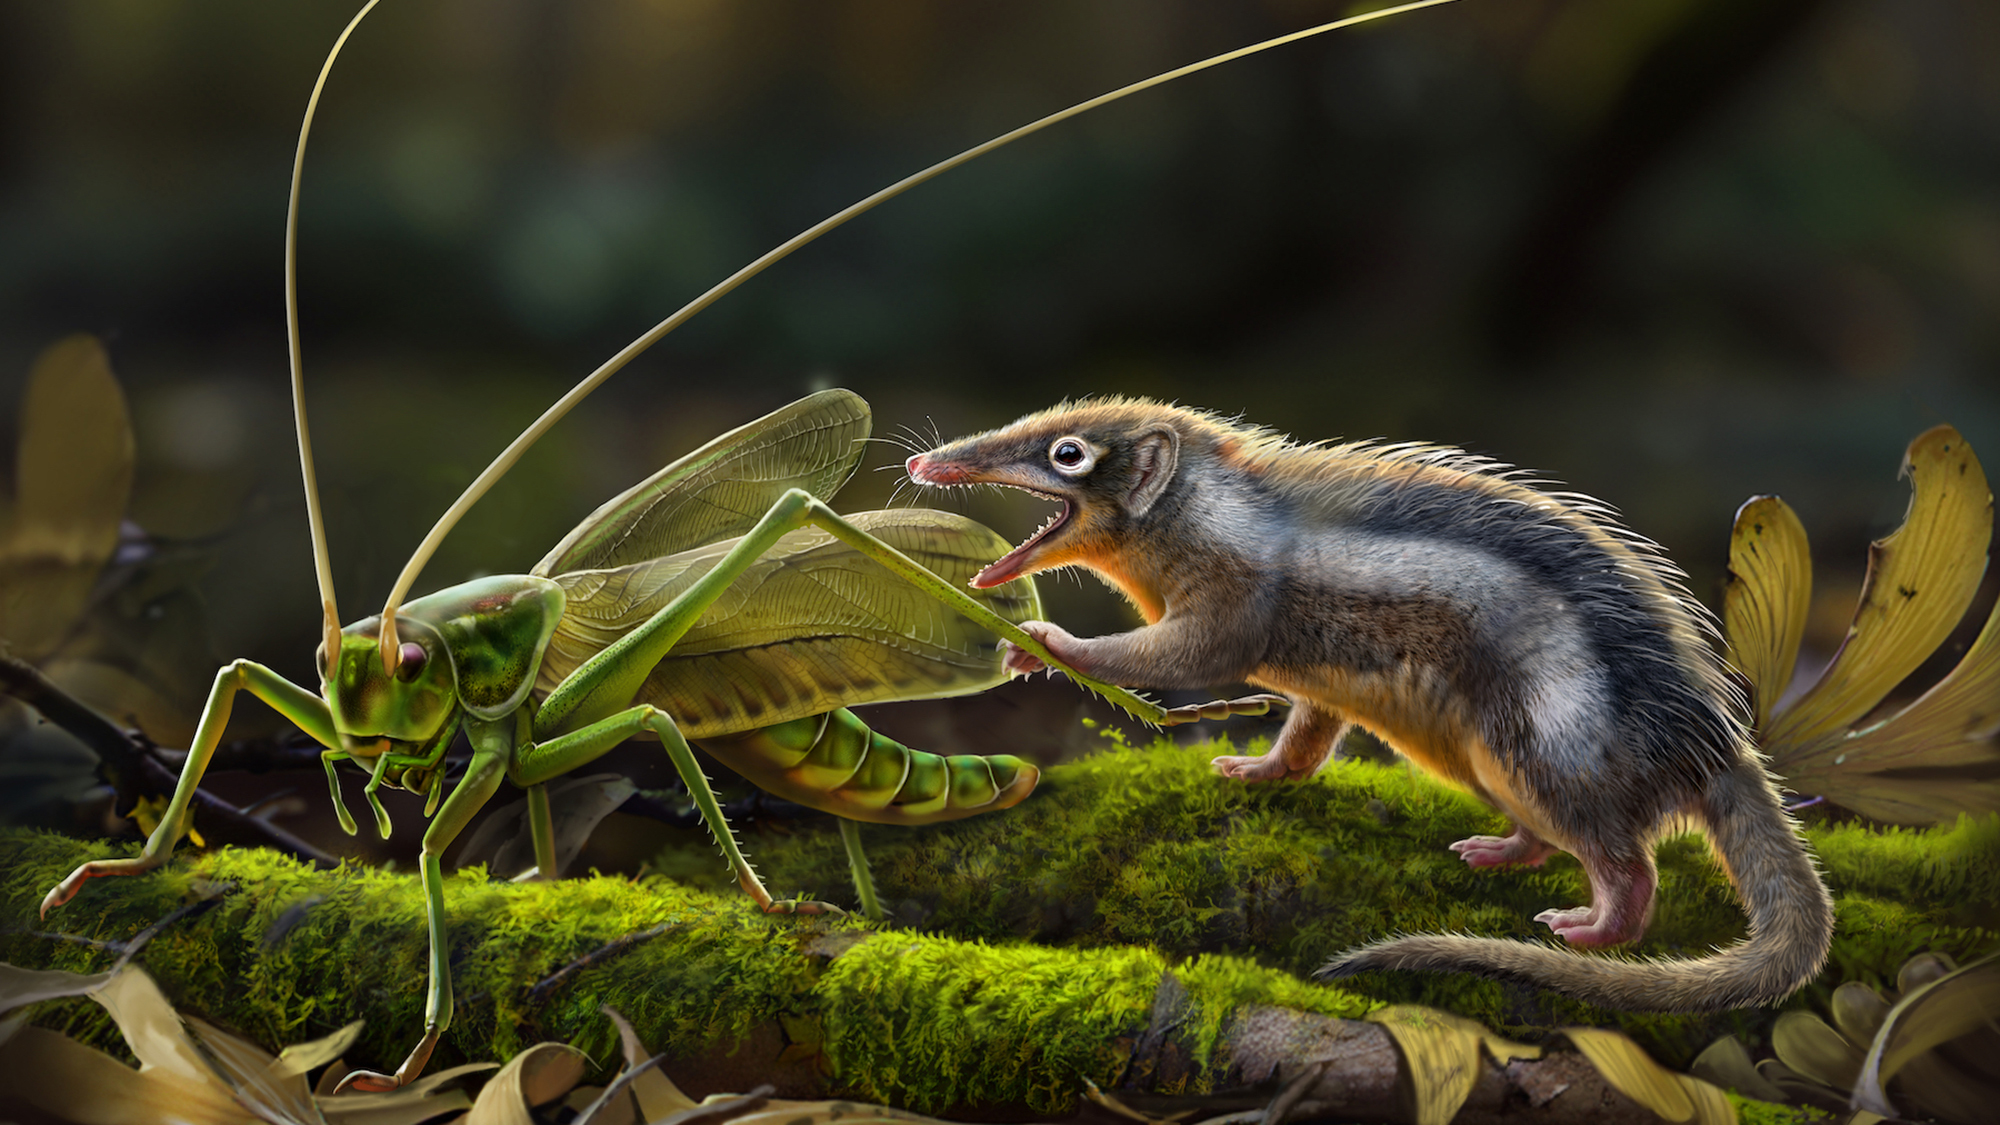 a small ferrit-like mammal from the jurassic period goes after a winged insect